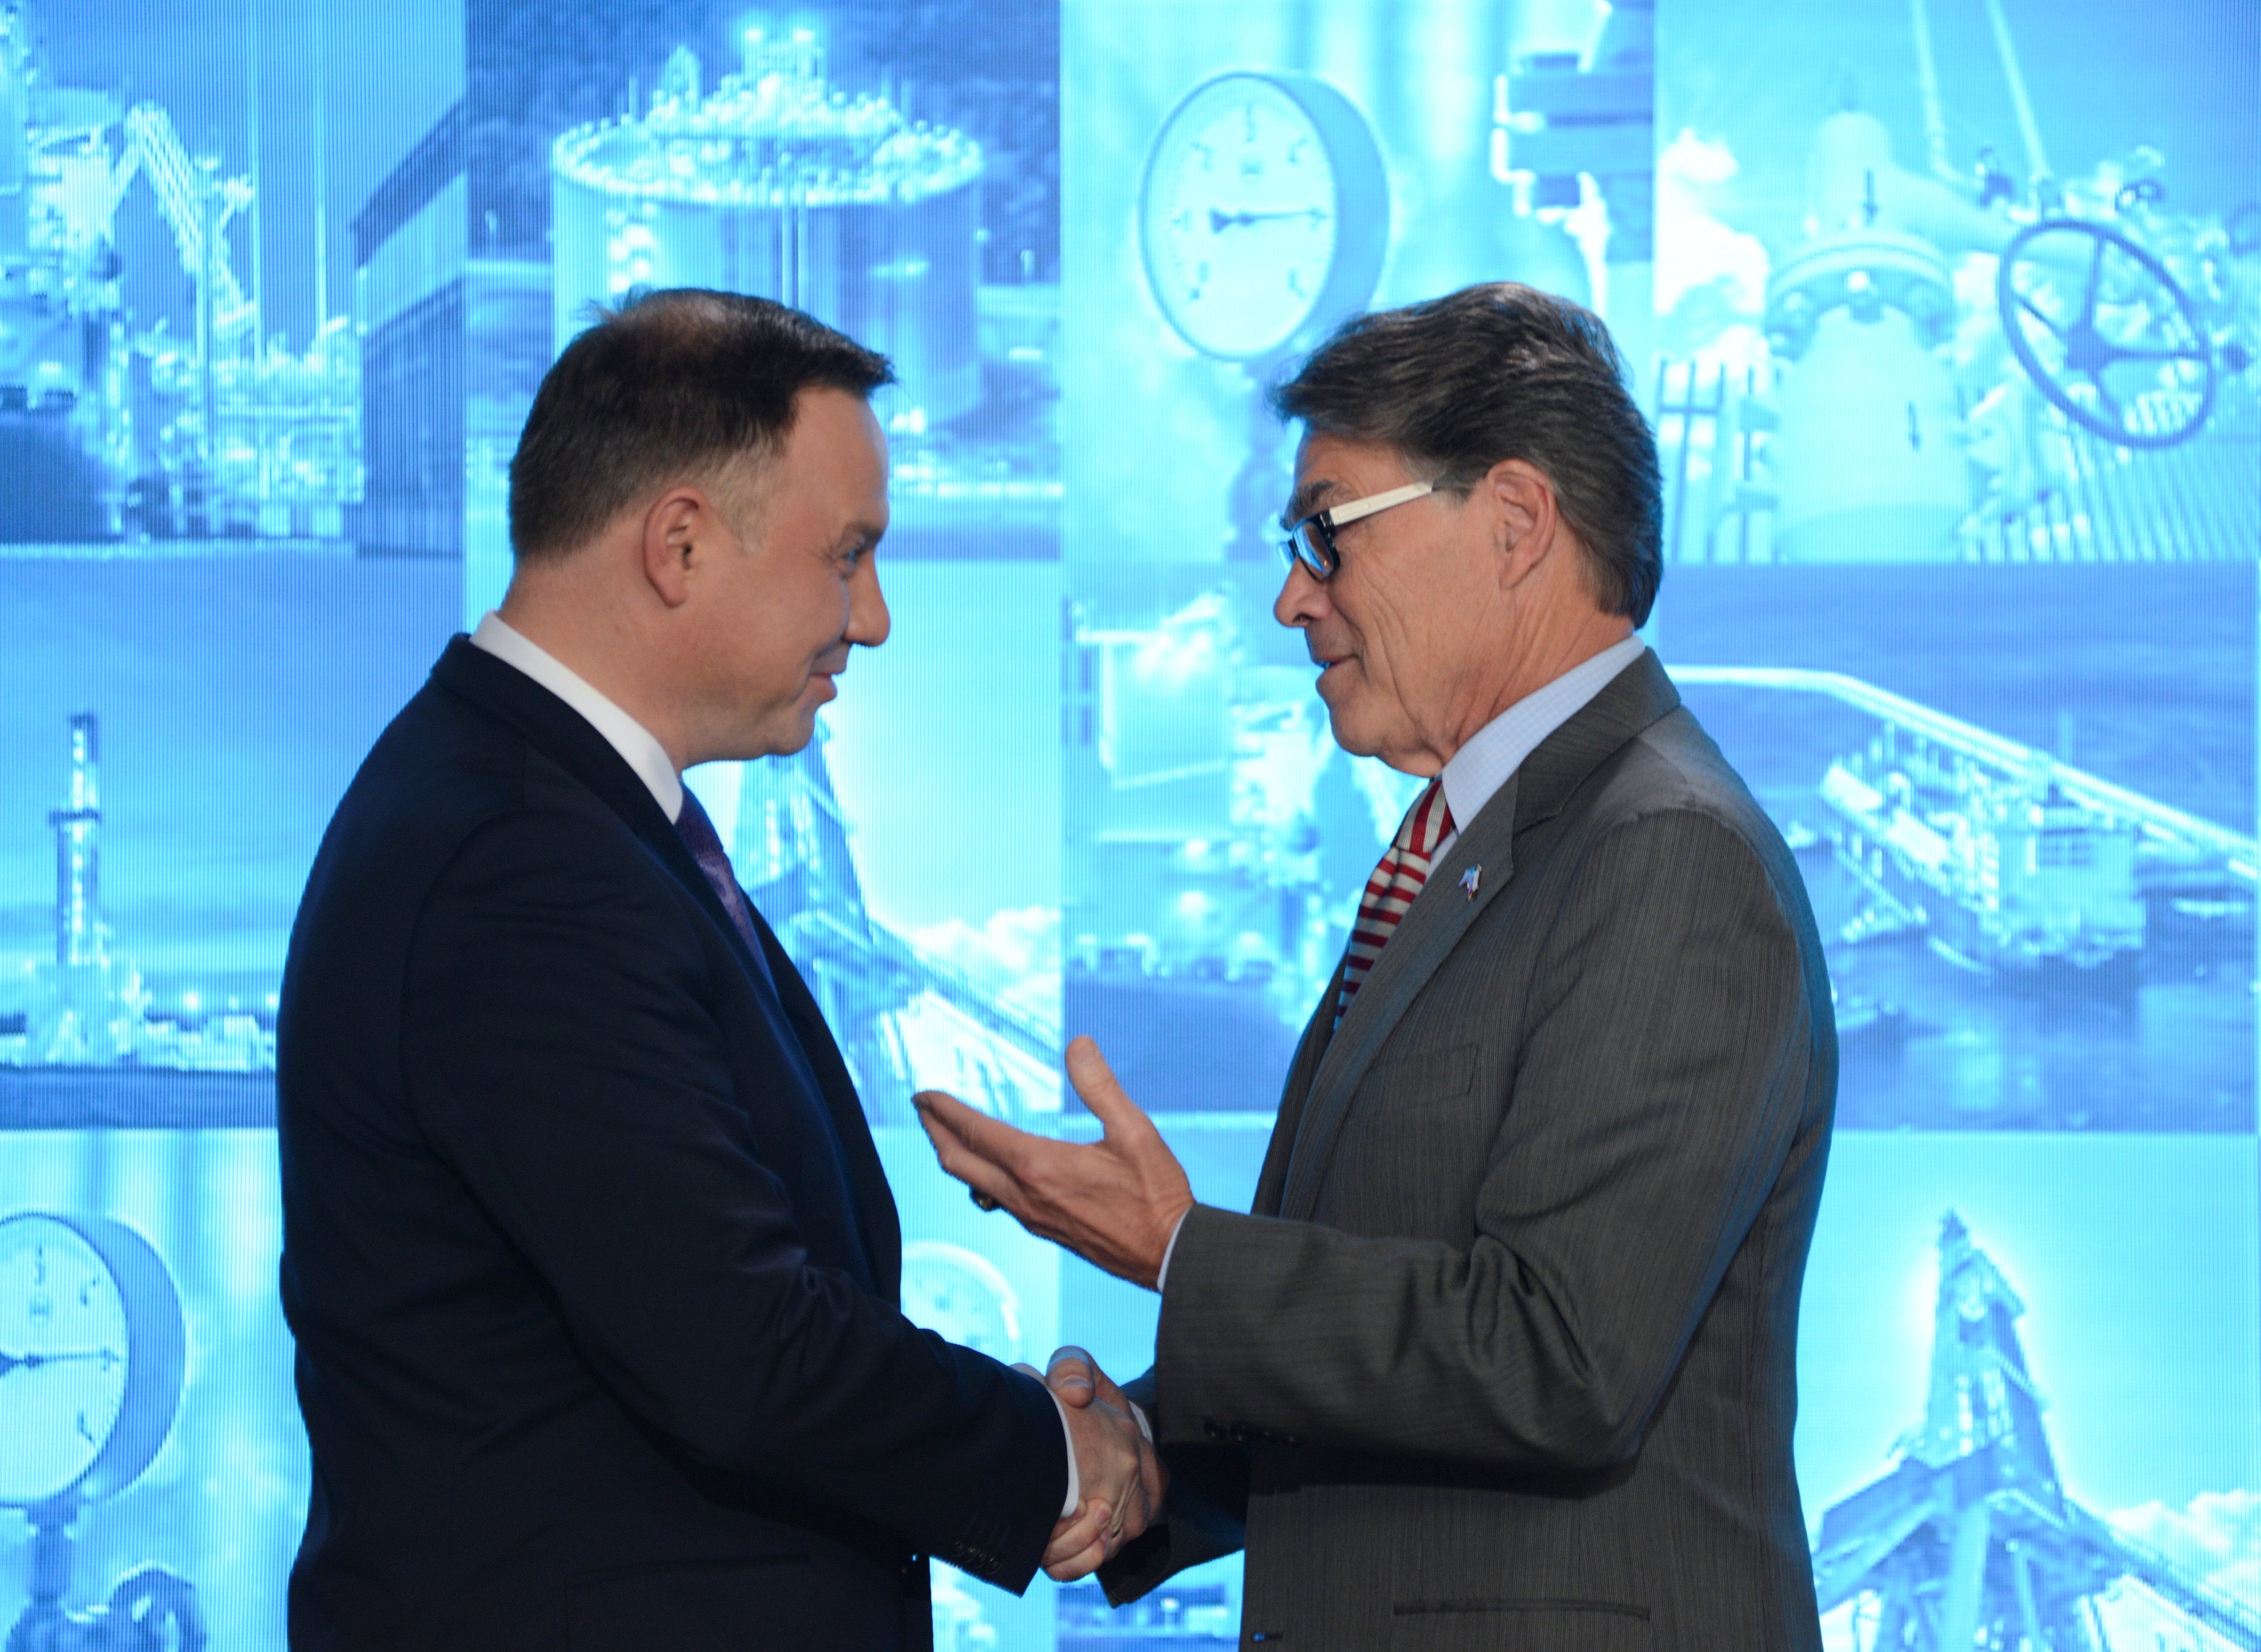 Poland's President Andrzej Duda and U.S. Energy Secretary Rick Perry during joint news conference with Polish gas company PGNiG after signing a contract about LNG supplies in Warsaw